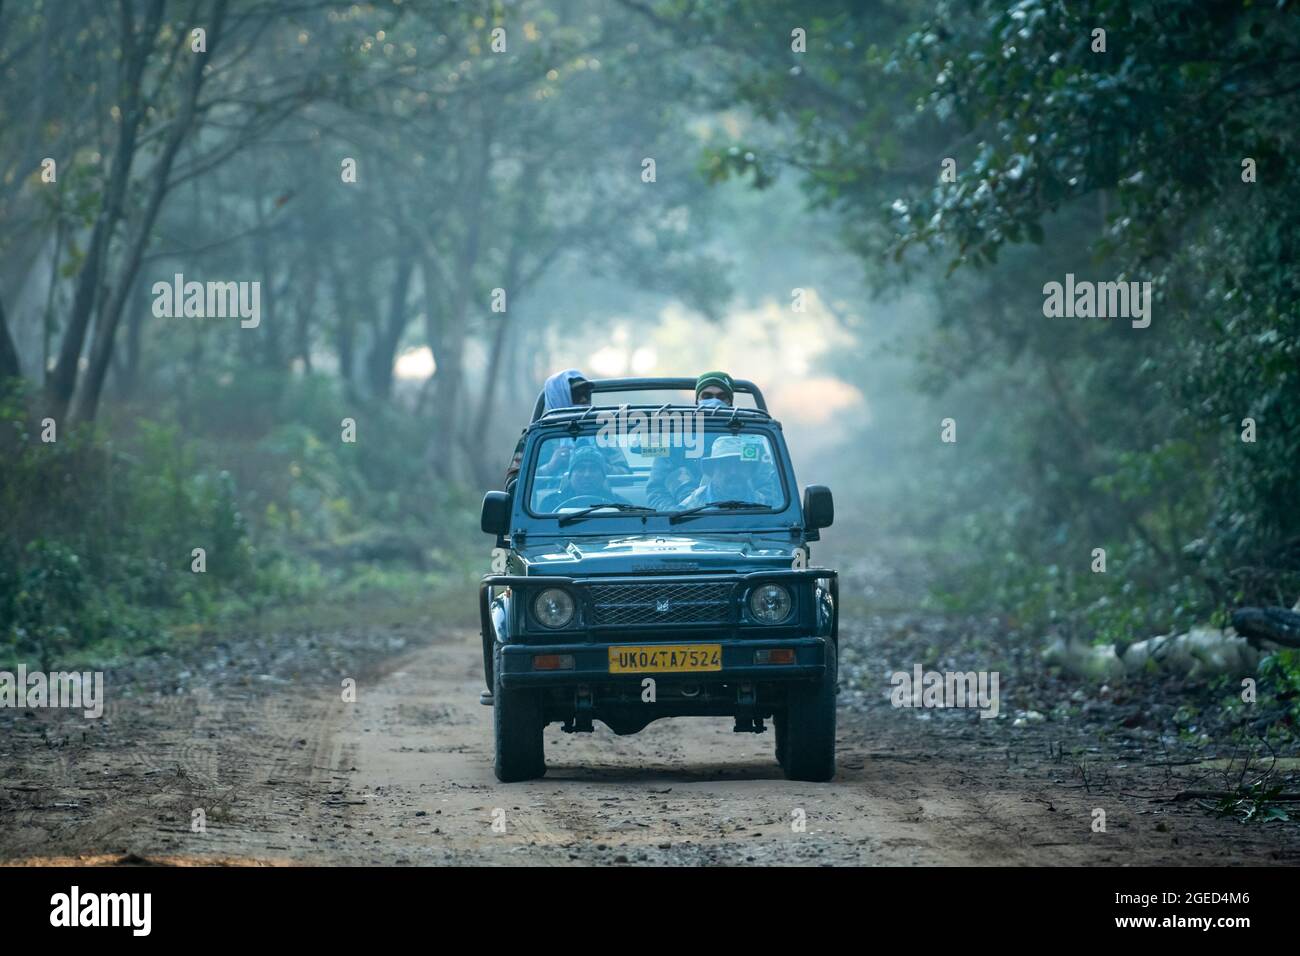 Jim corbett national park, Ramnagar, Uttarakhand, India - December 7, 2020  - wildlife safari or game drive on scenic road by gypsy or jeep on cold win  Stock Photo - Alamy